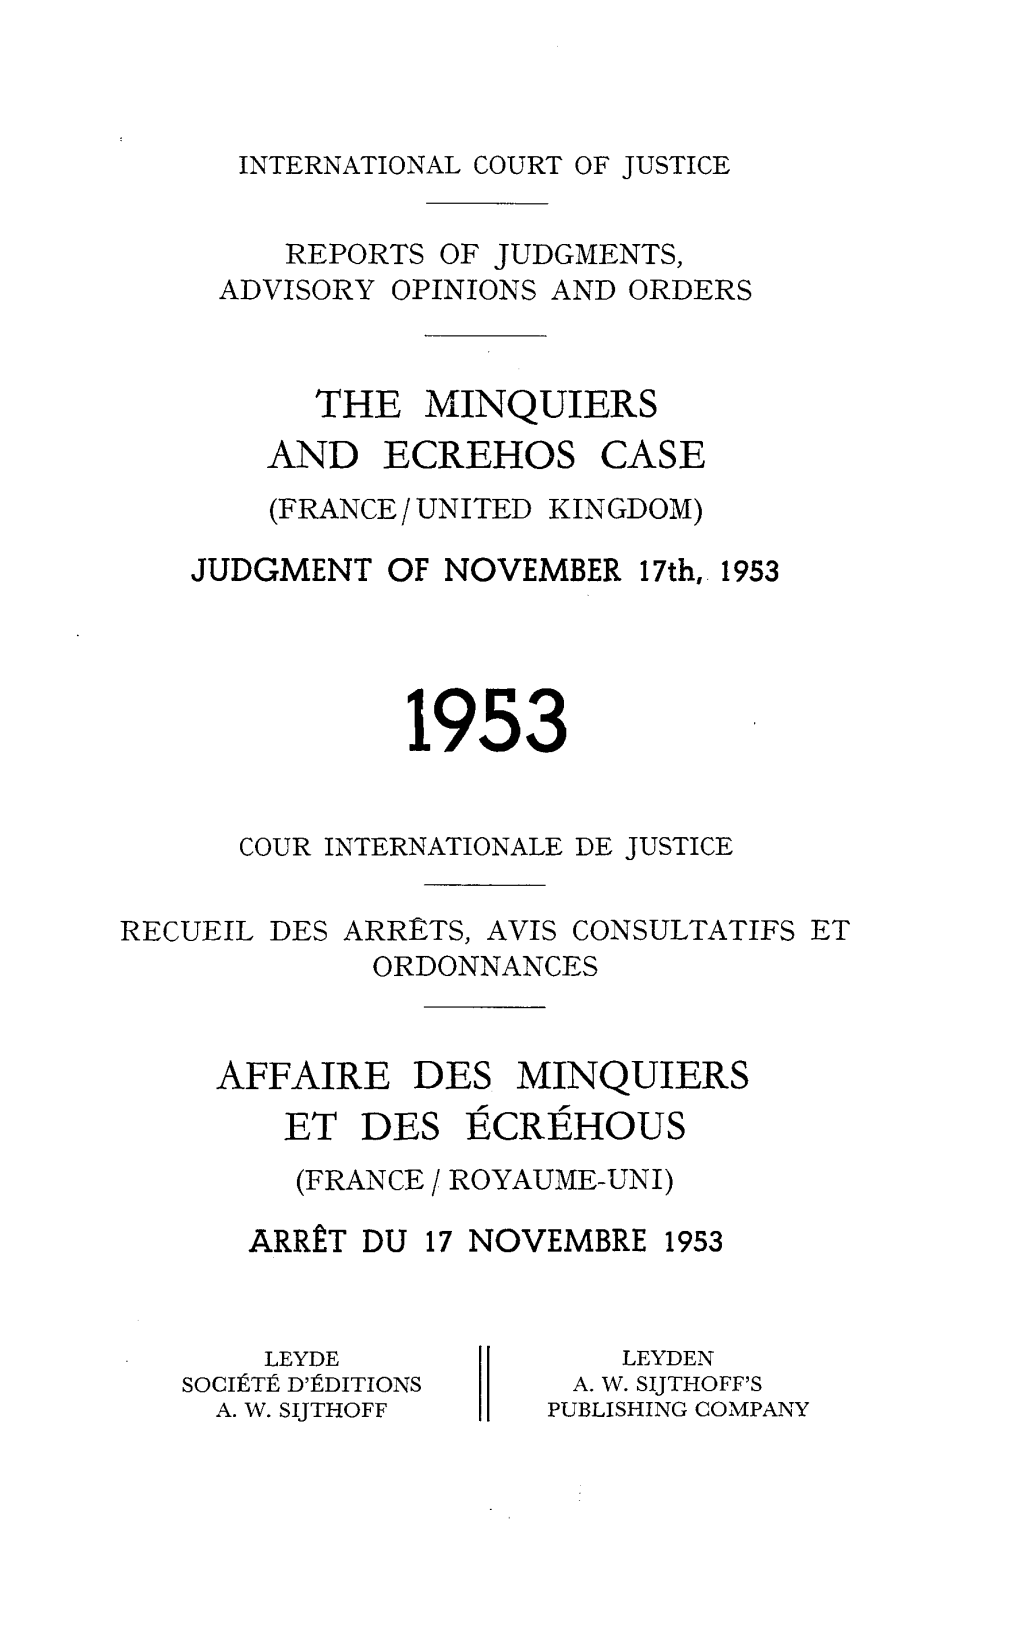 THE MINQUIERS and ECREHOS CASE (FRANCE / UNITED KINGDOM) JUDGMENT of NOVEMBER 17Th, 1953